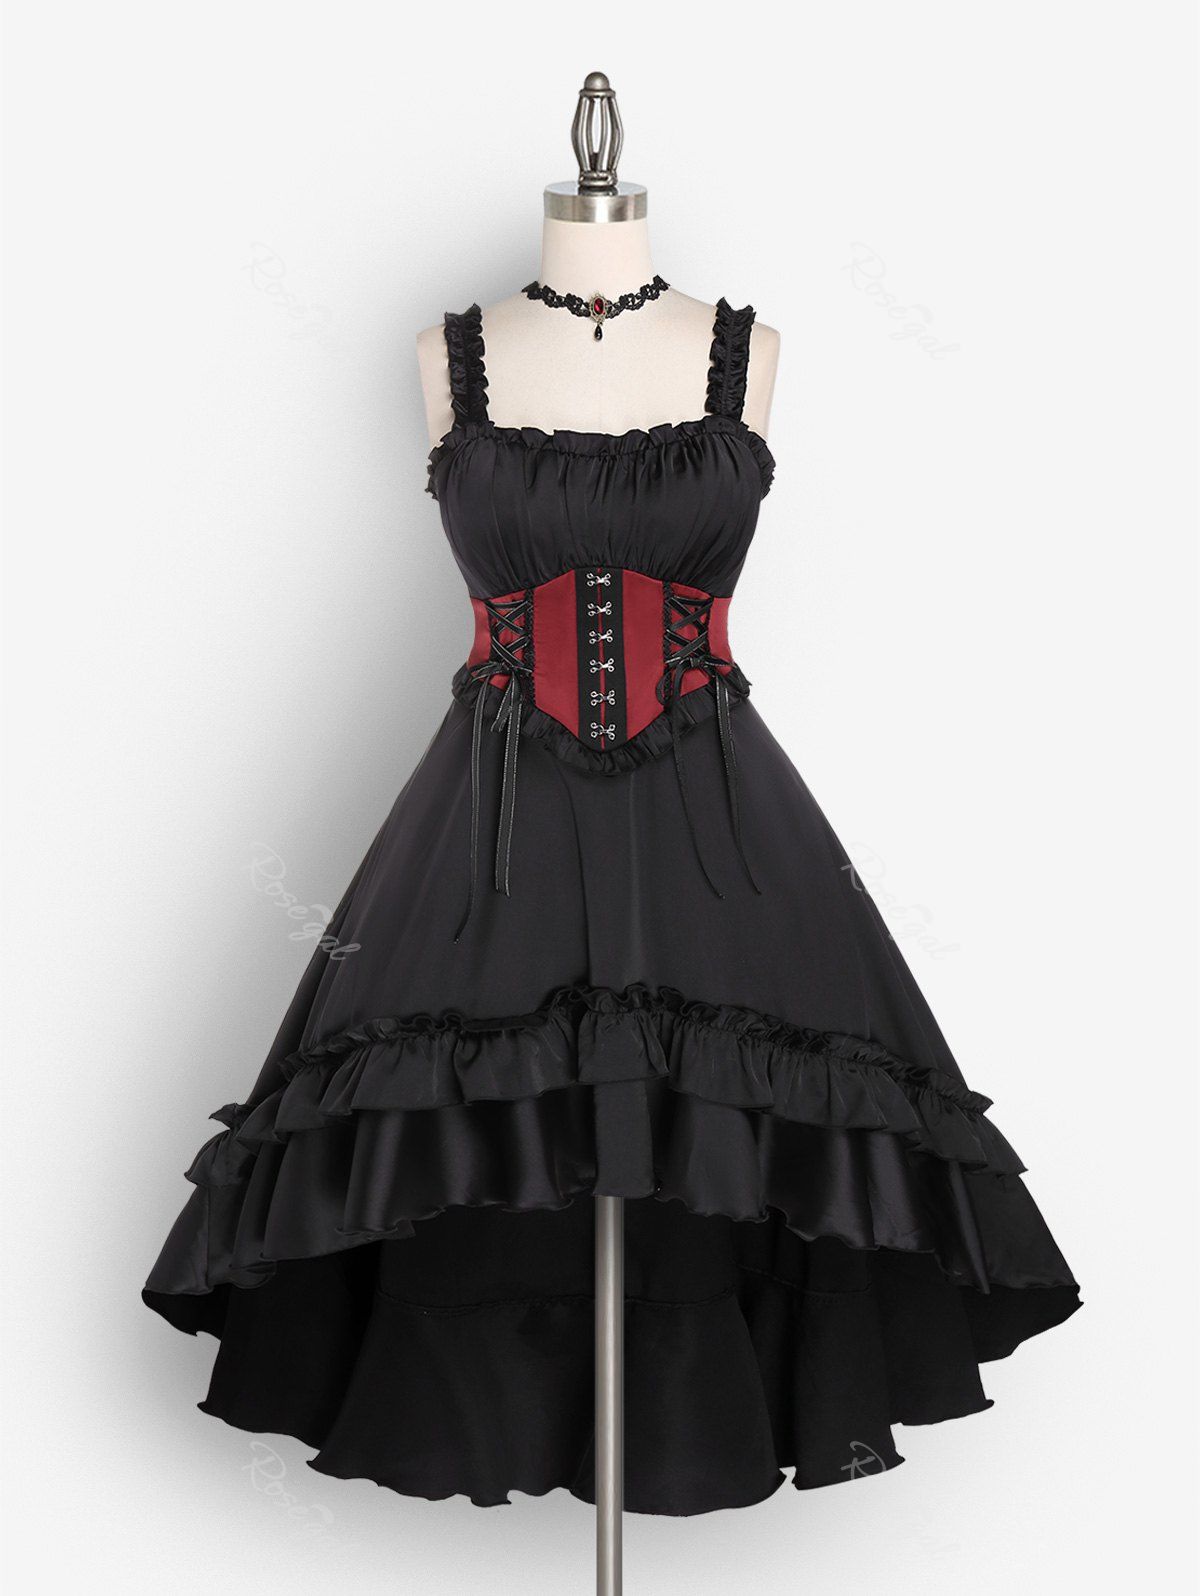 Hot Lolita Layered Ruffled Frilled Lace-up High Low Maxi Corset Dress And Lace Red Gem Choker Gothic Outfit  